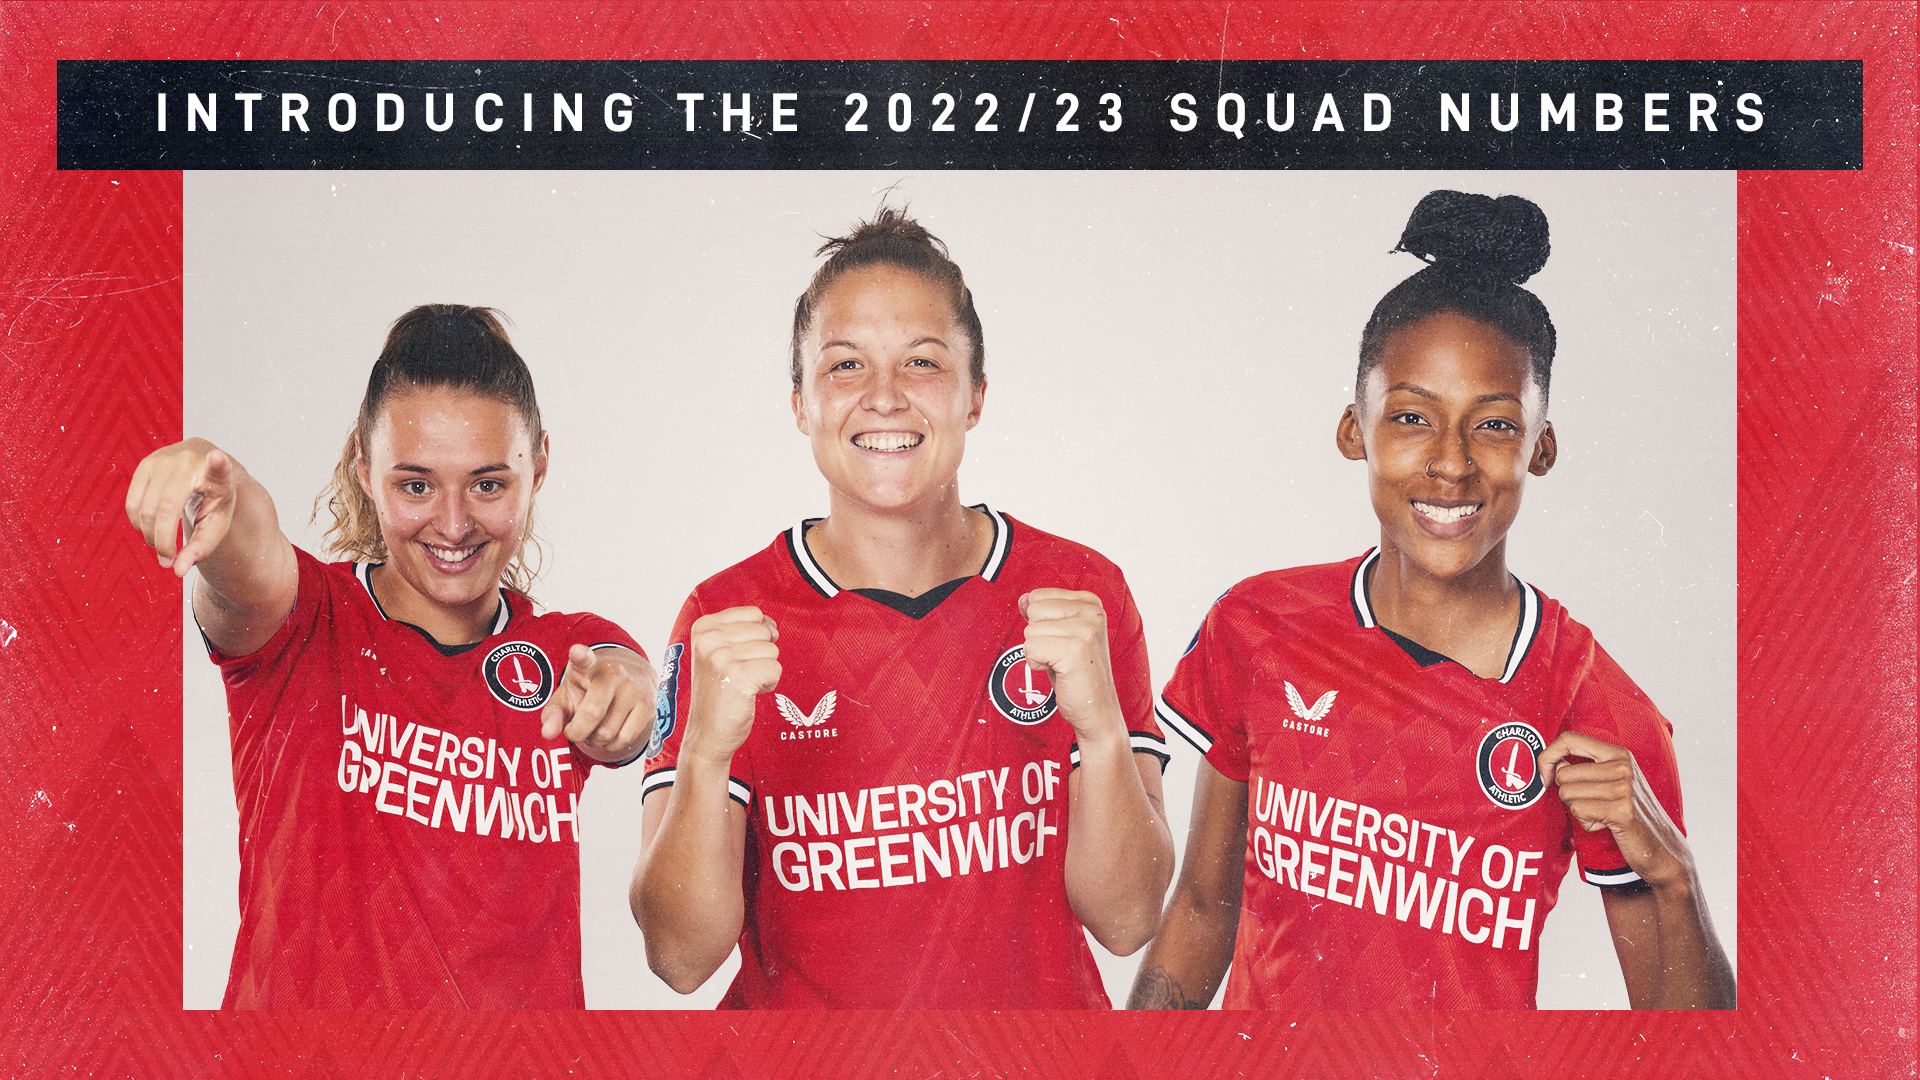 Introducing the 2022/23 squad numbers 